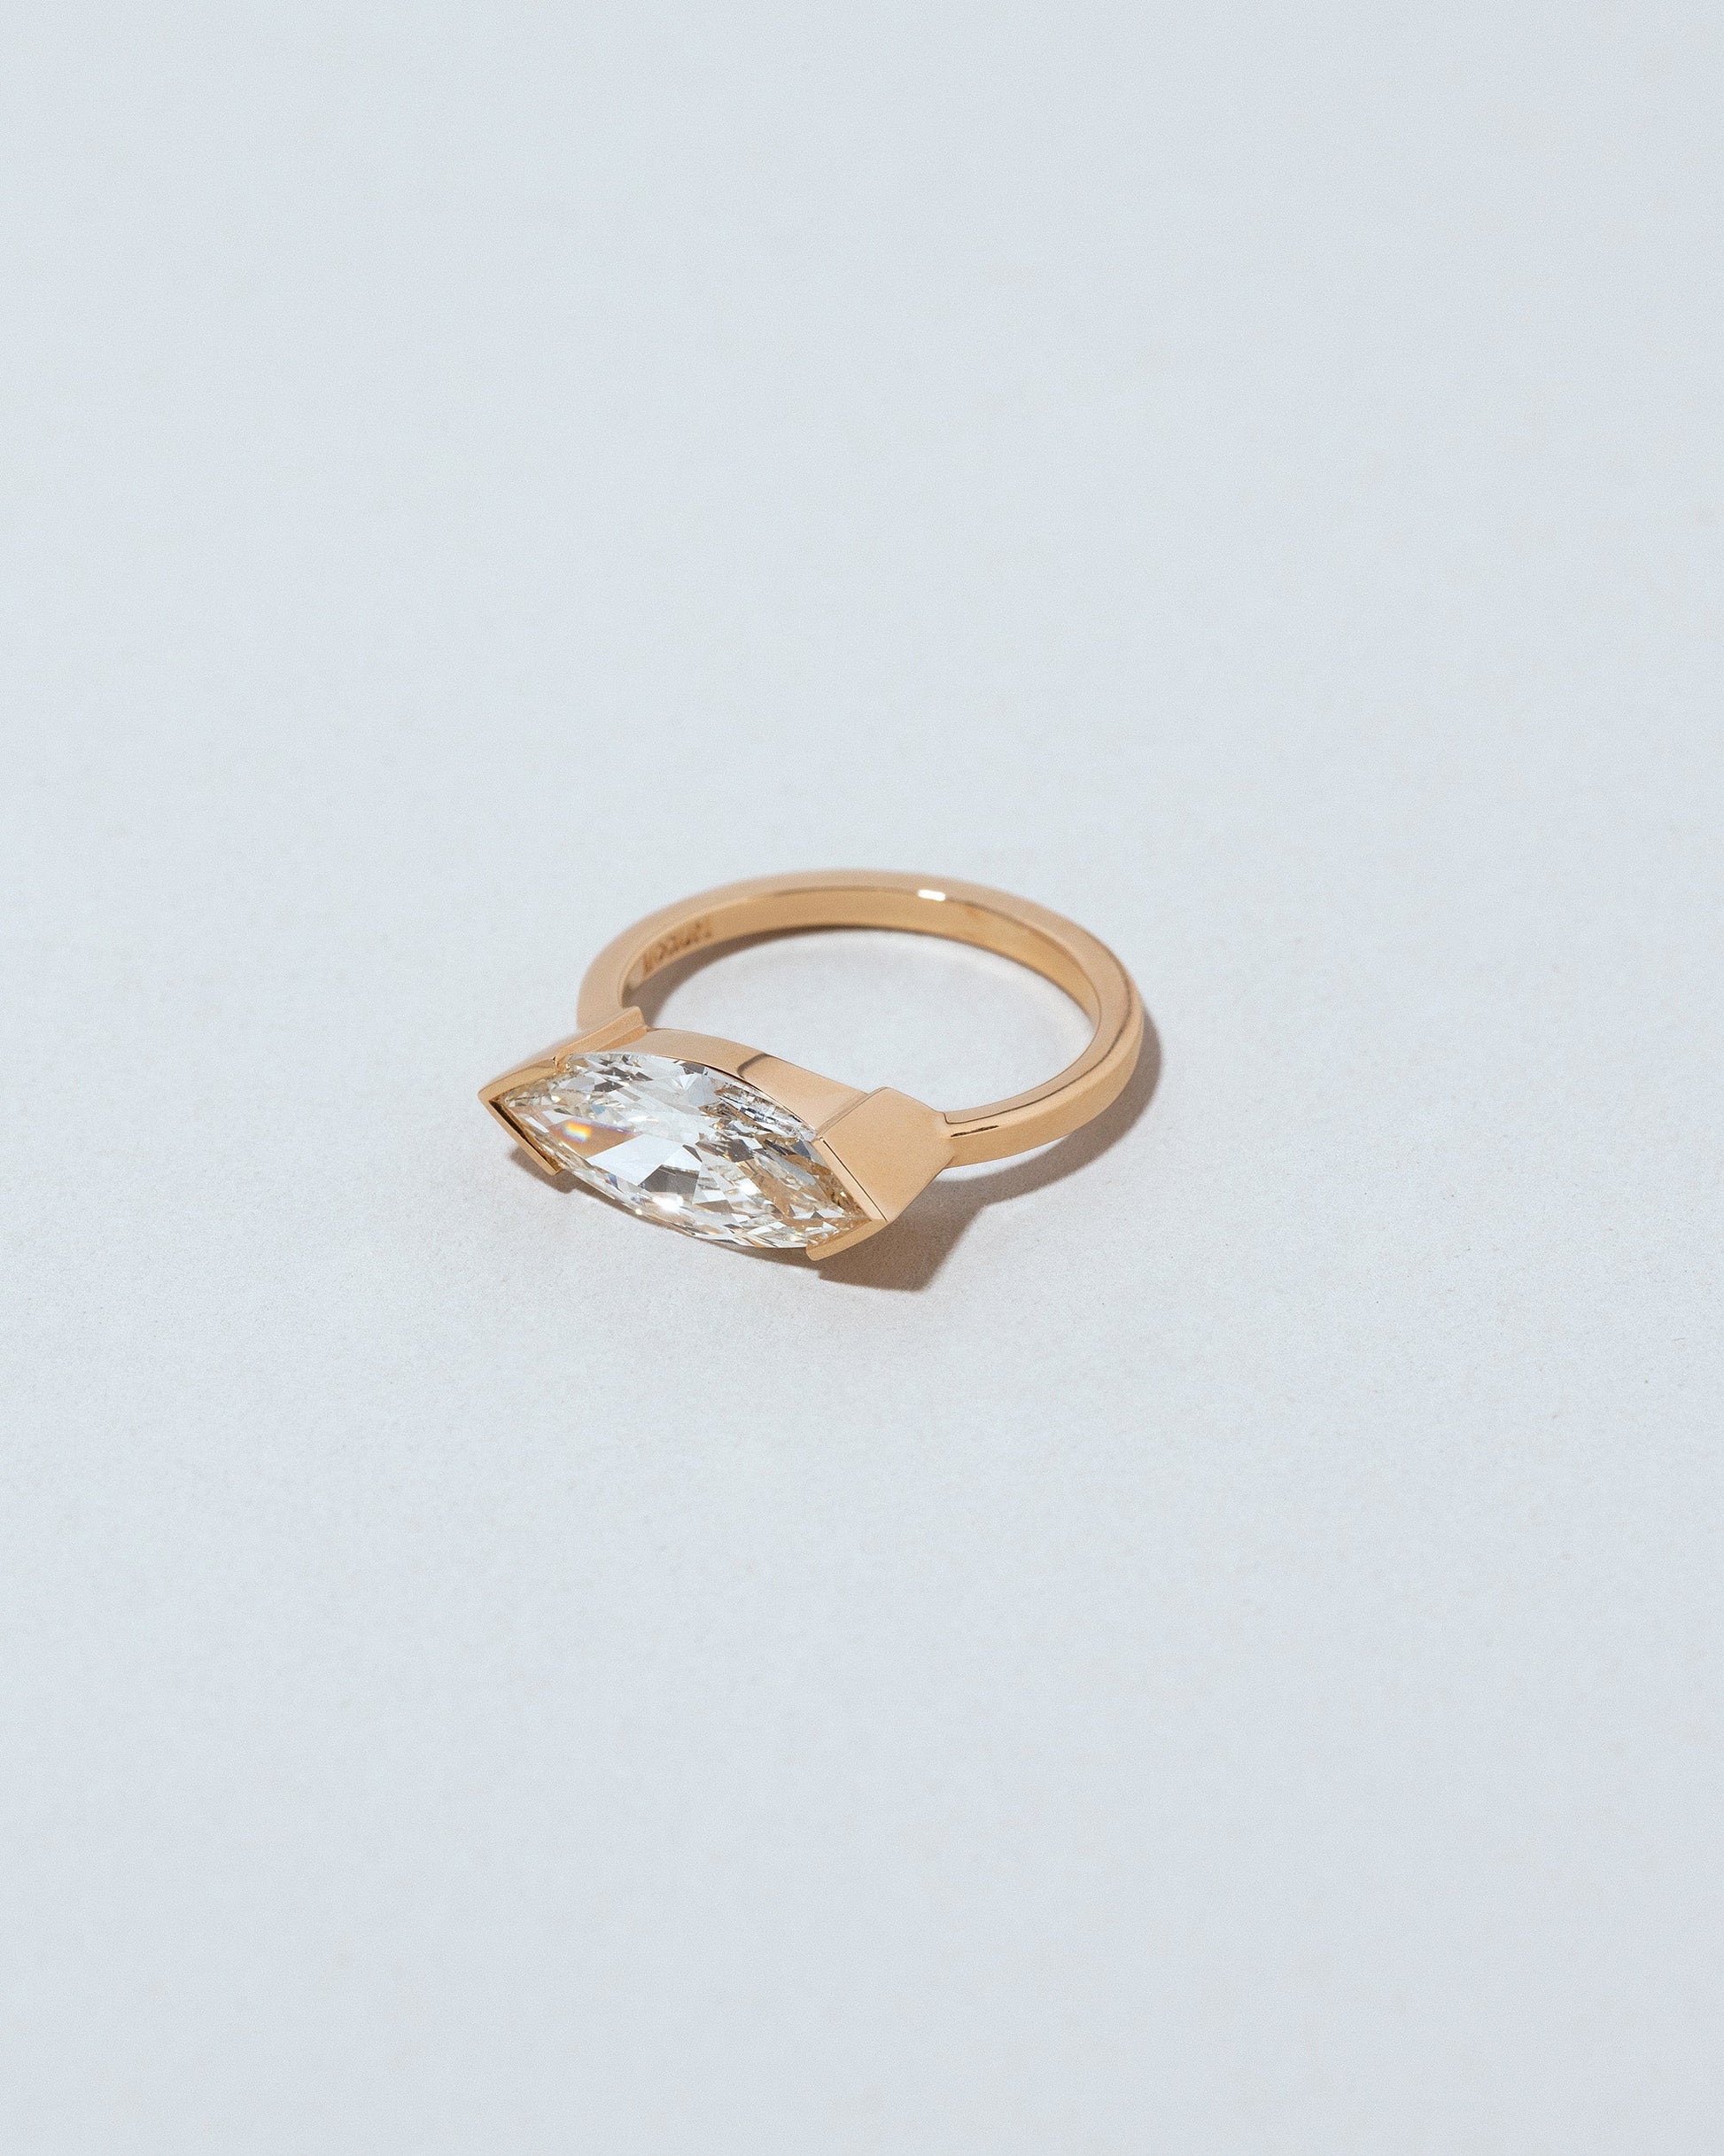 Daylight Ring on light colored background.